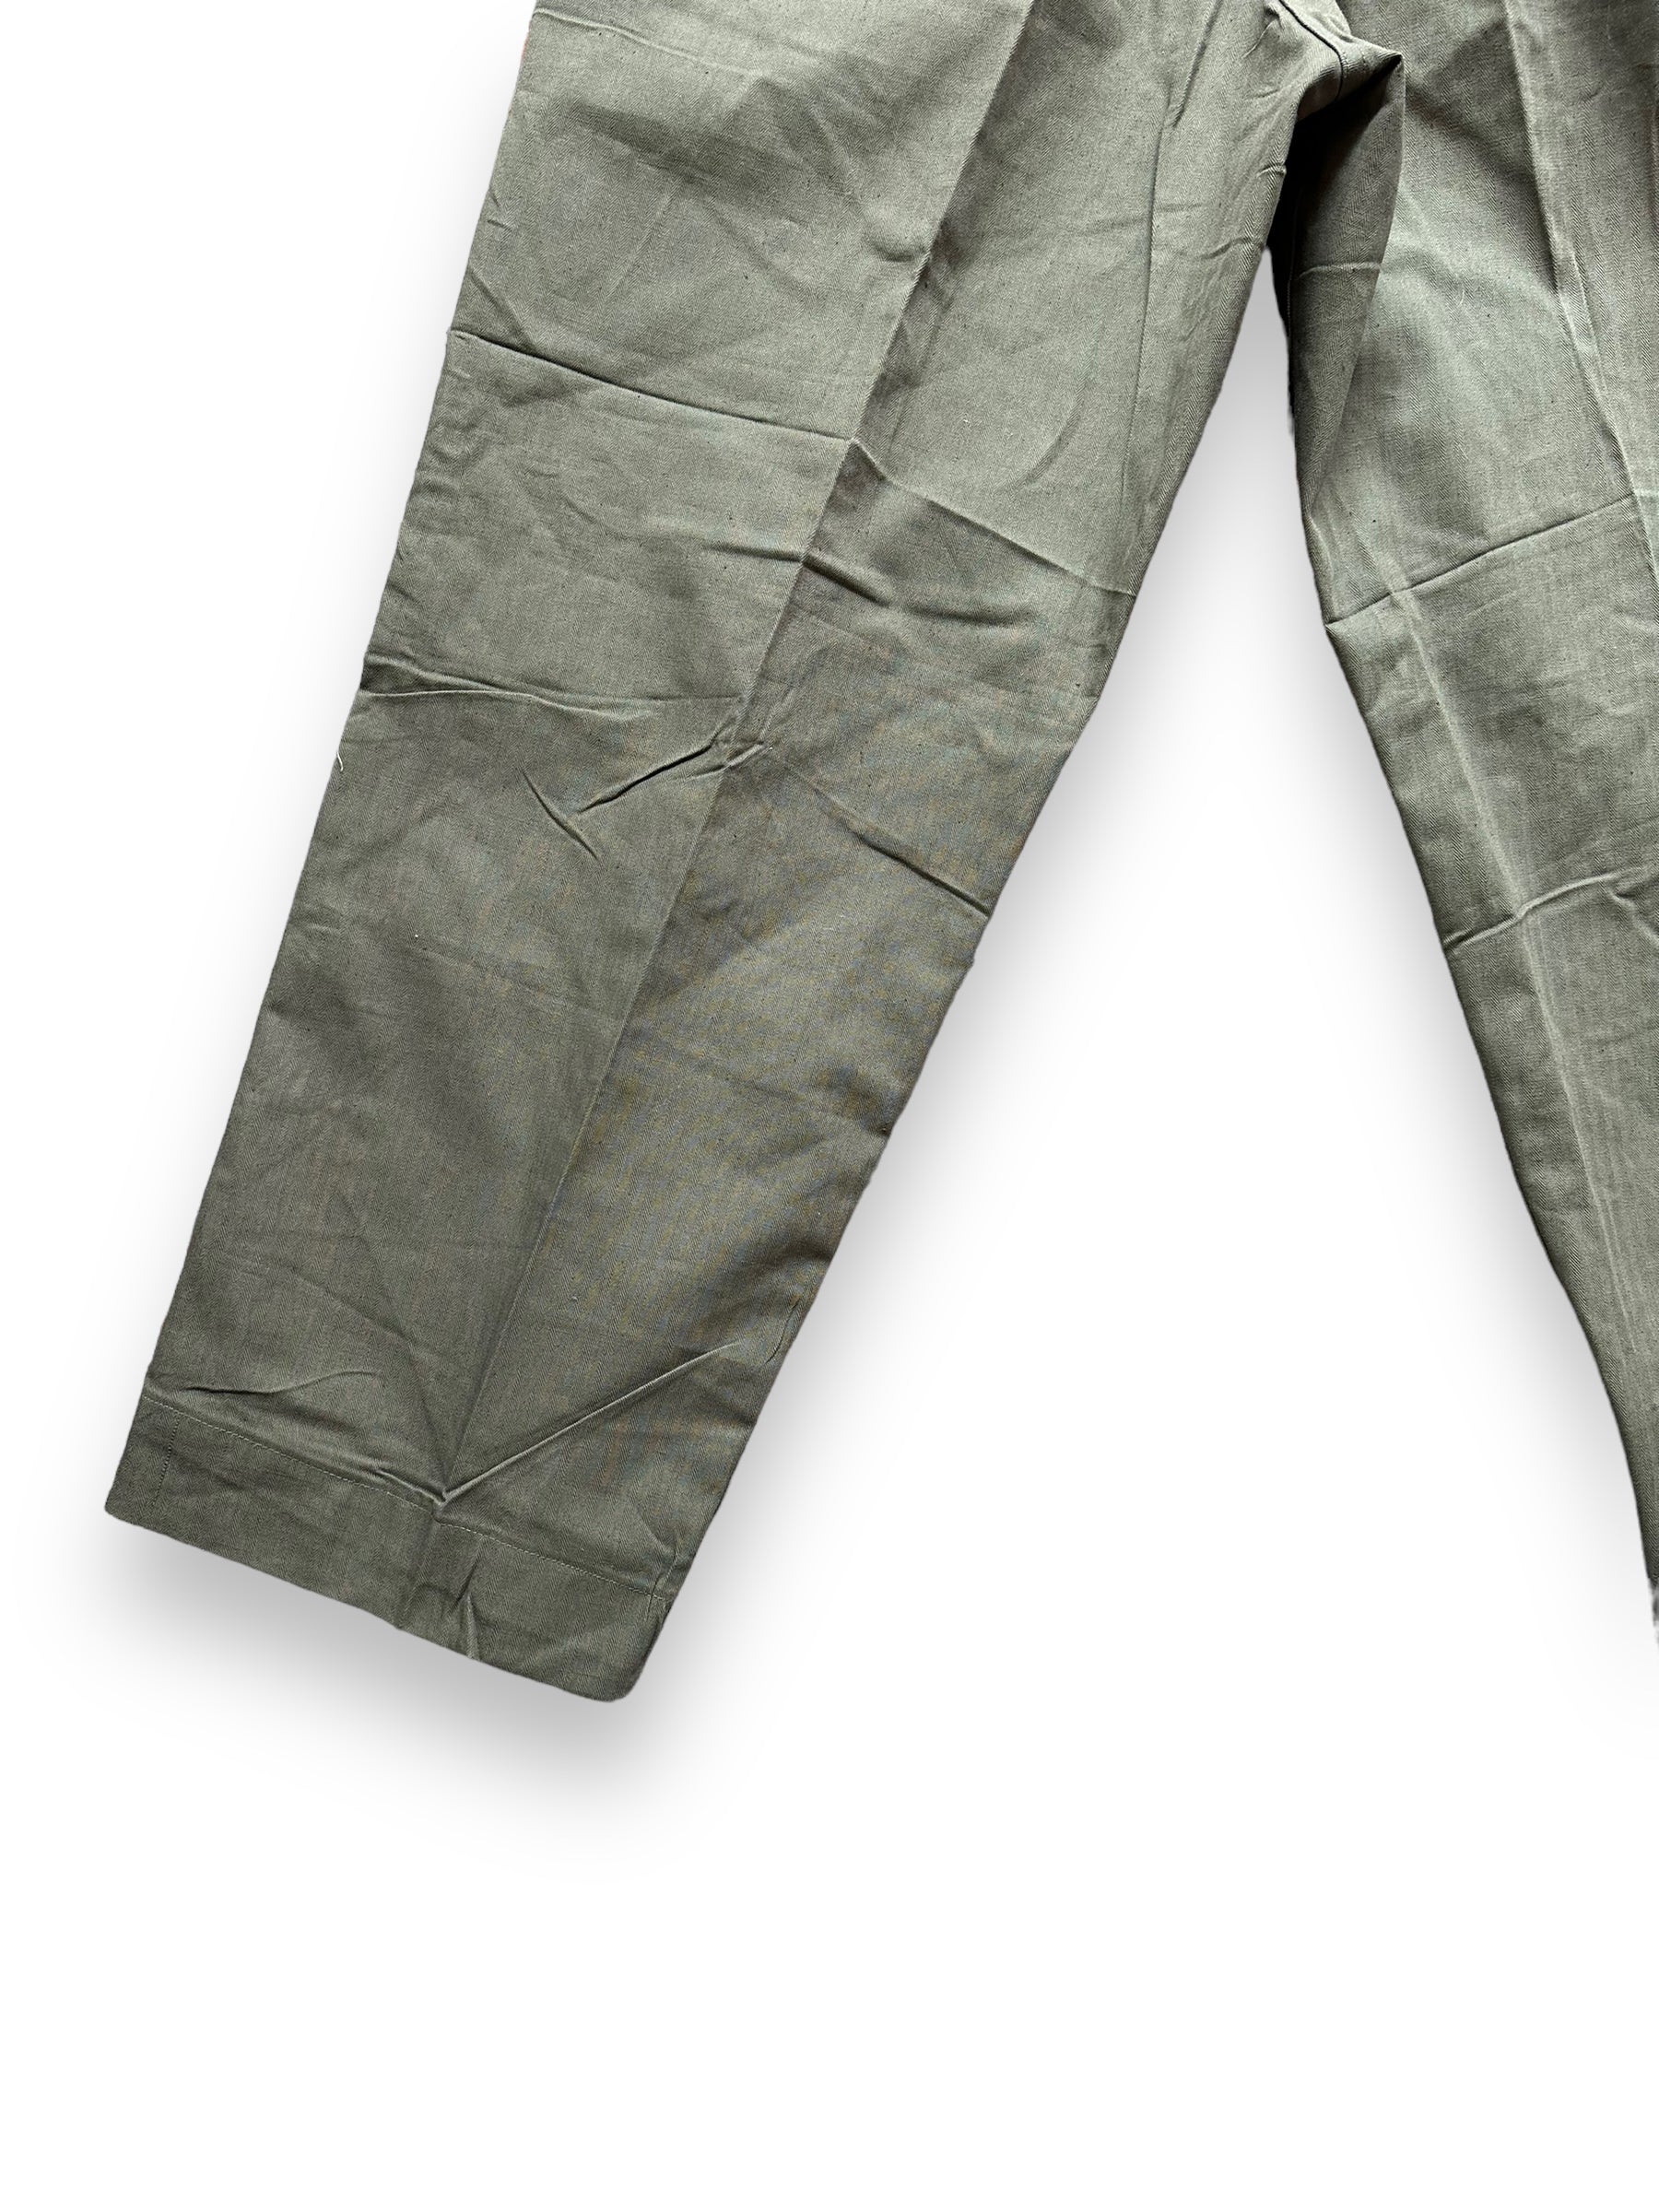 Rear Left Lower View of Vintage WWII M-43 HBT Field Cotton Trousers Olive Drab W34 | Barn Owl Vintage Seattle | Vintage Military Trousers Seattle